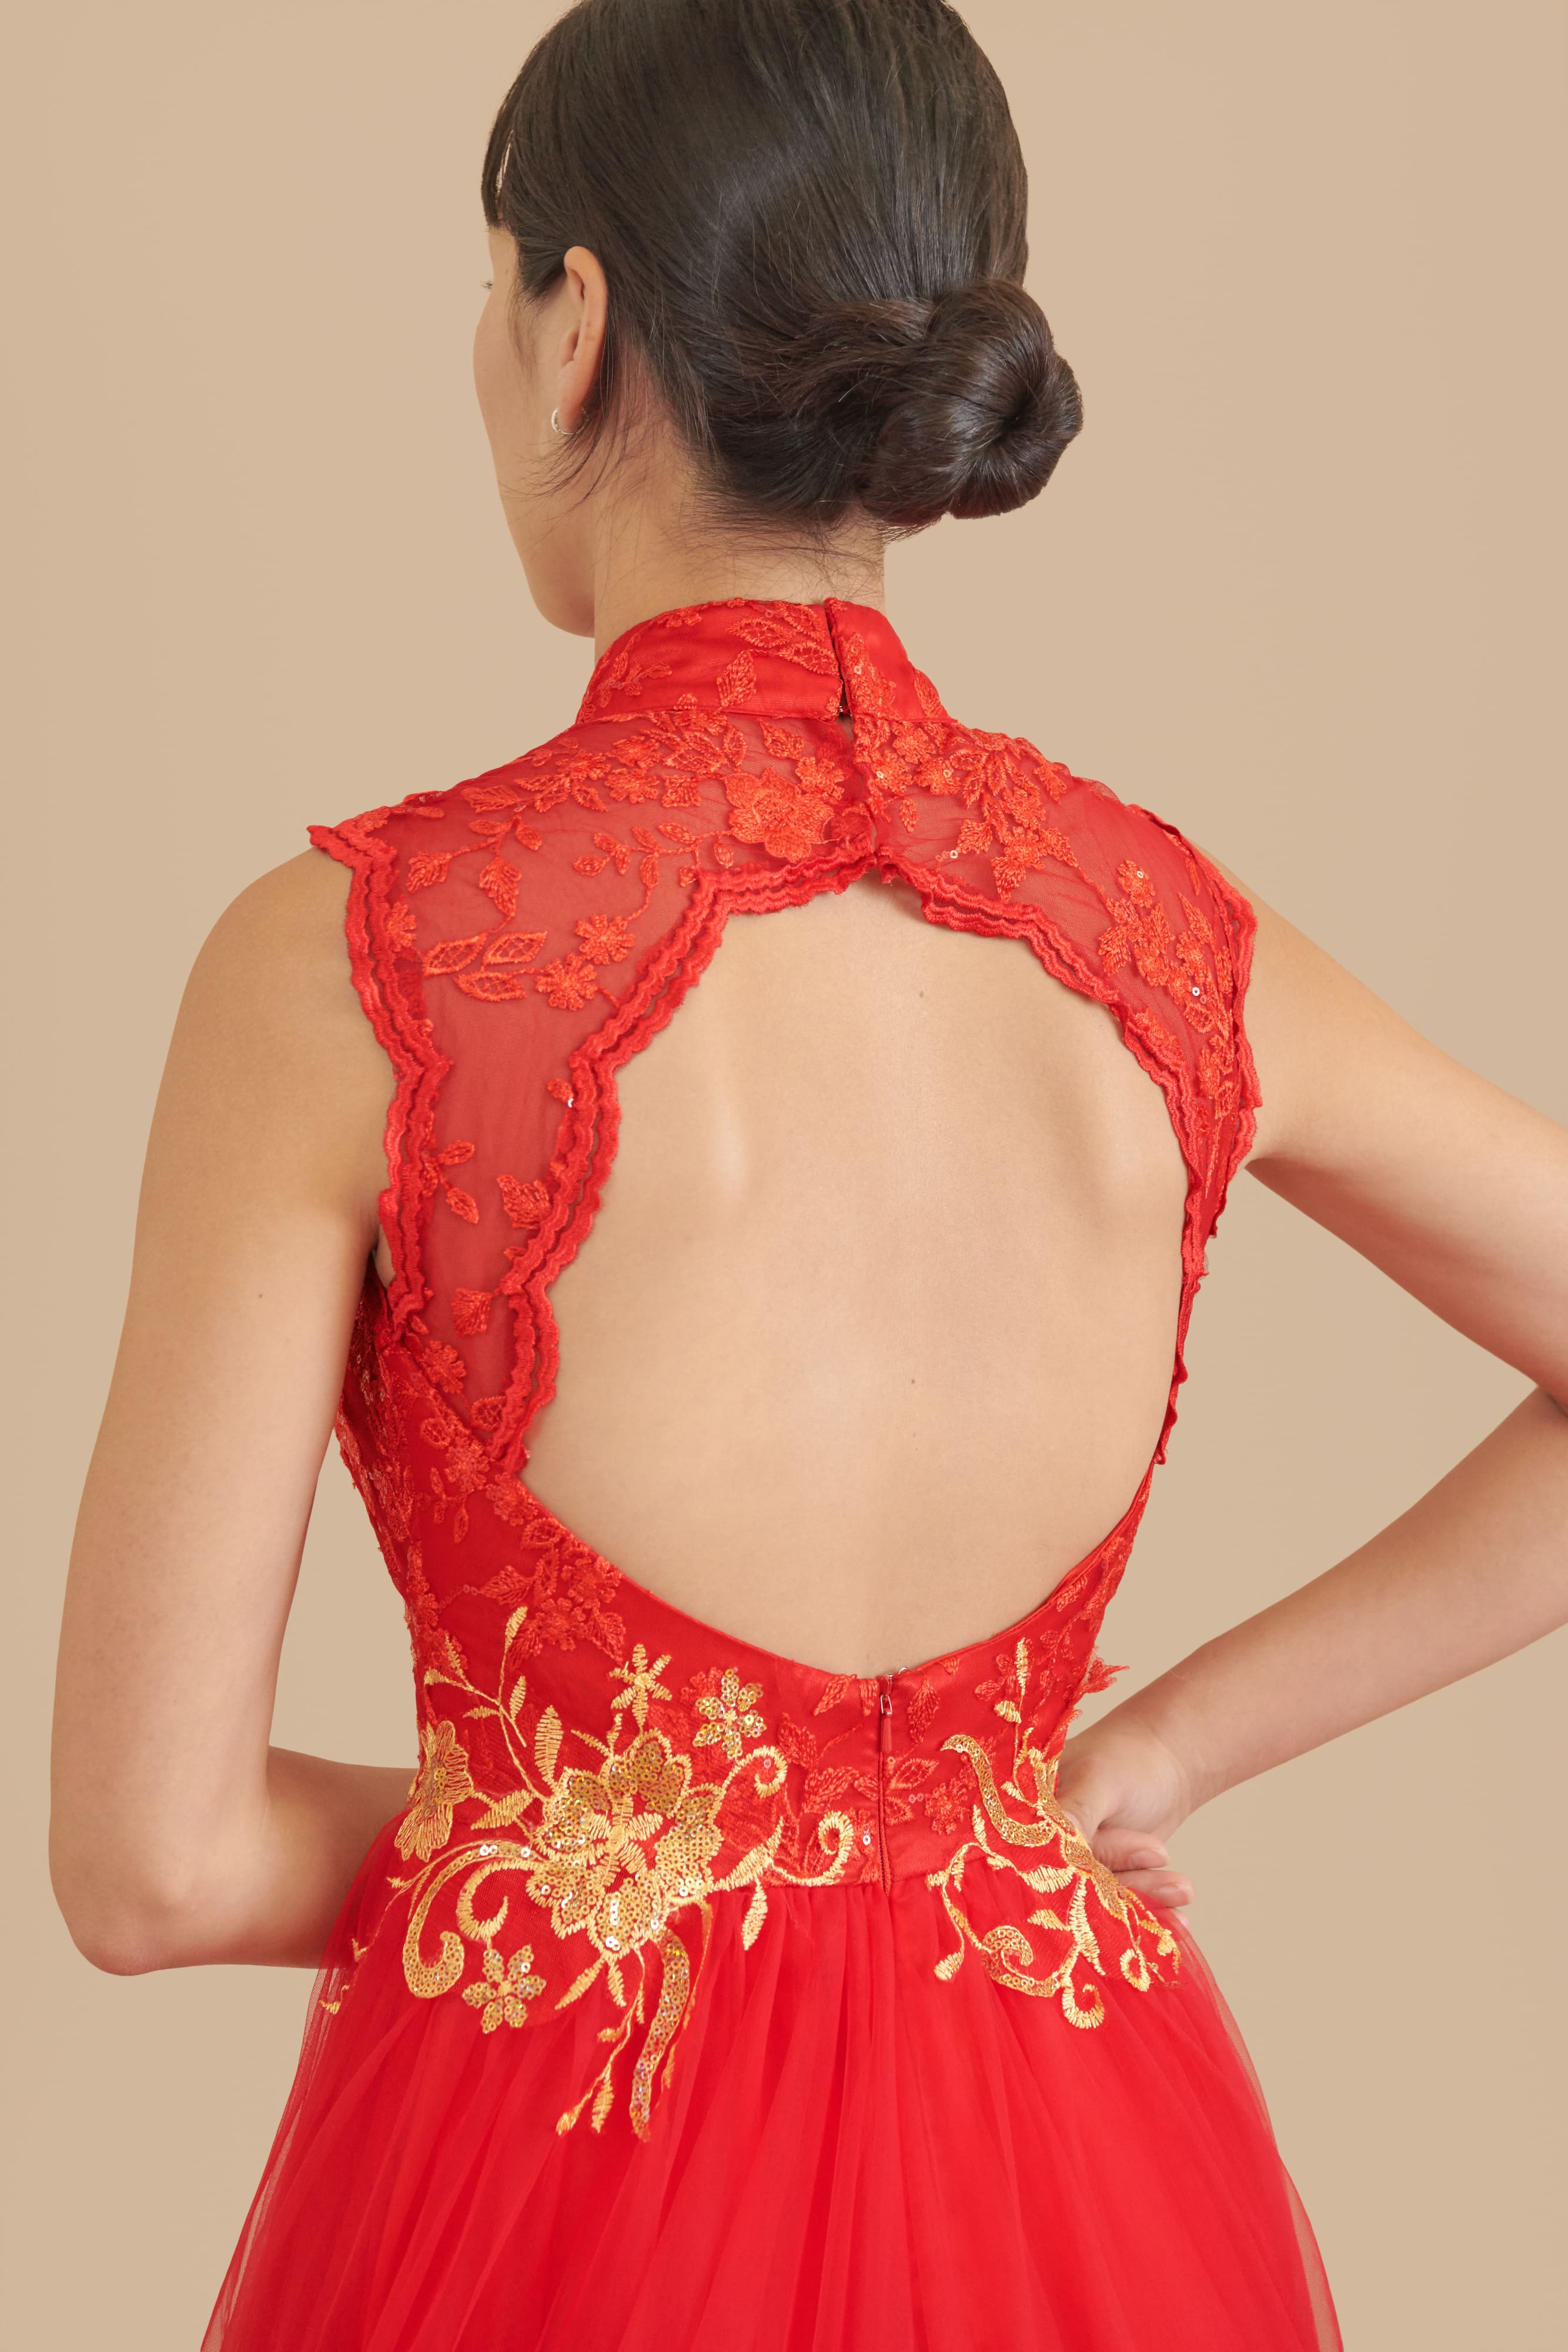 Red Lace Wedding Dress For A British Chinese Wedding